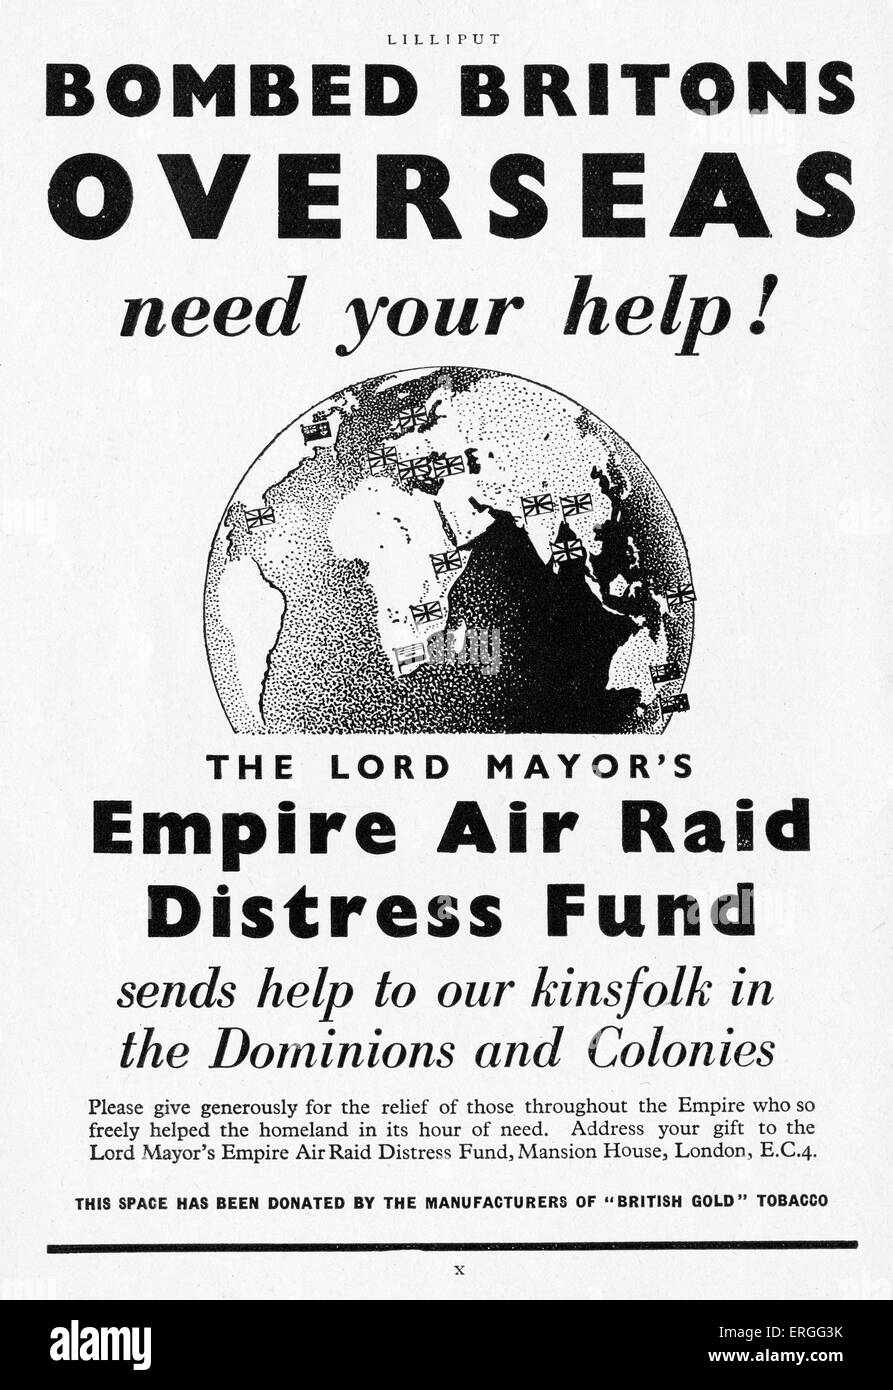 The Lord Mayor 's Empire Air Raid Distress Fund - campaign advertisment, July 1942. Headline: 'Bombed Britons Overseas need your help'. Support for citizens in British dominions and colonies. During WW2. Stock Photo